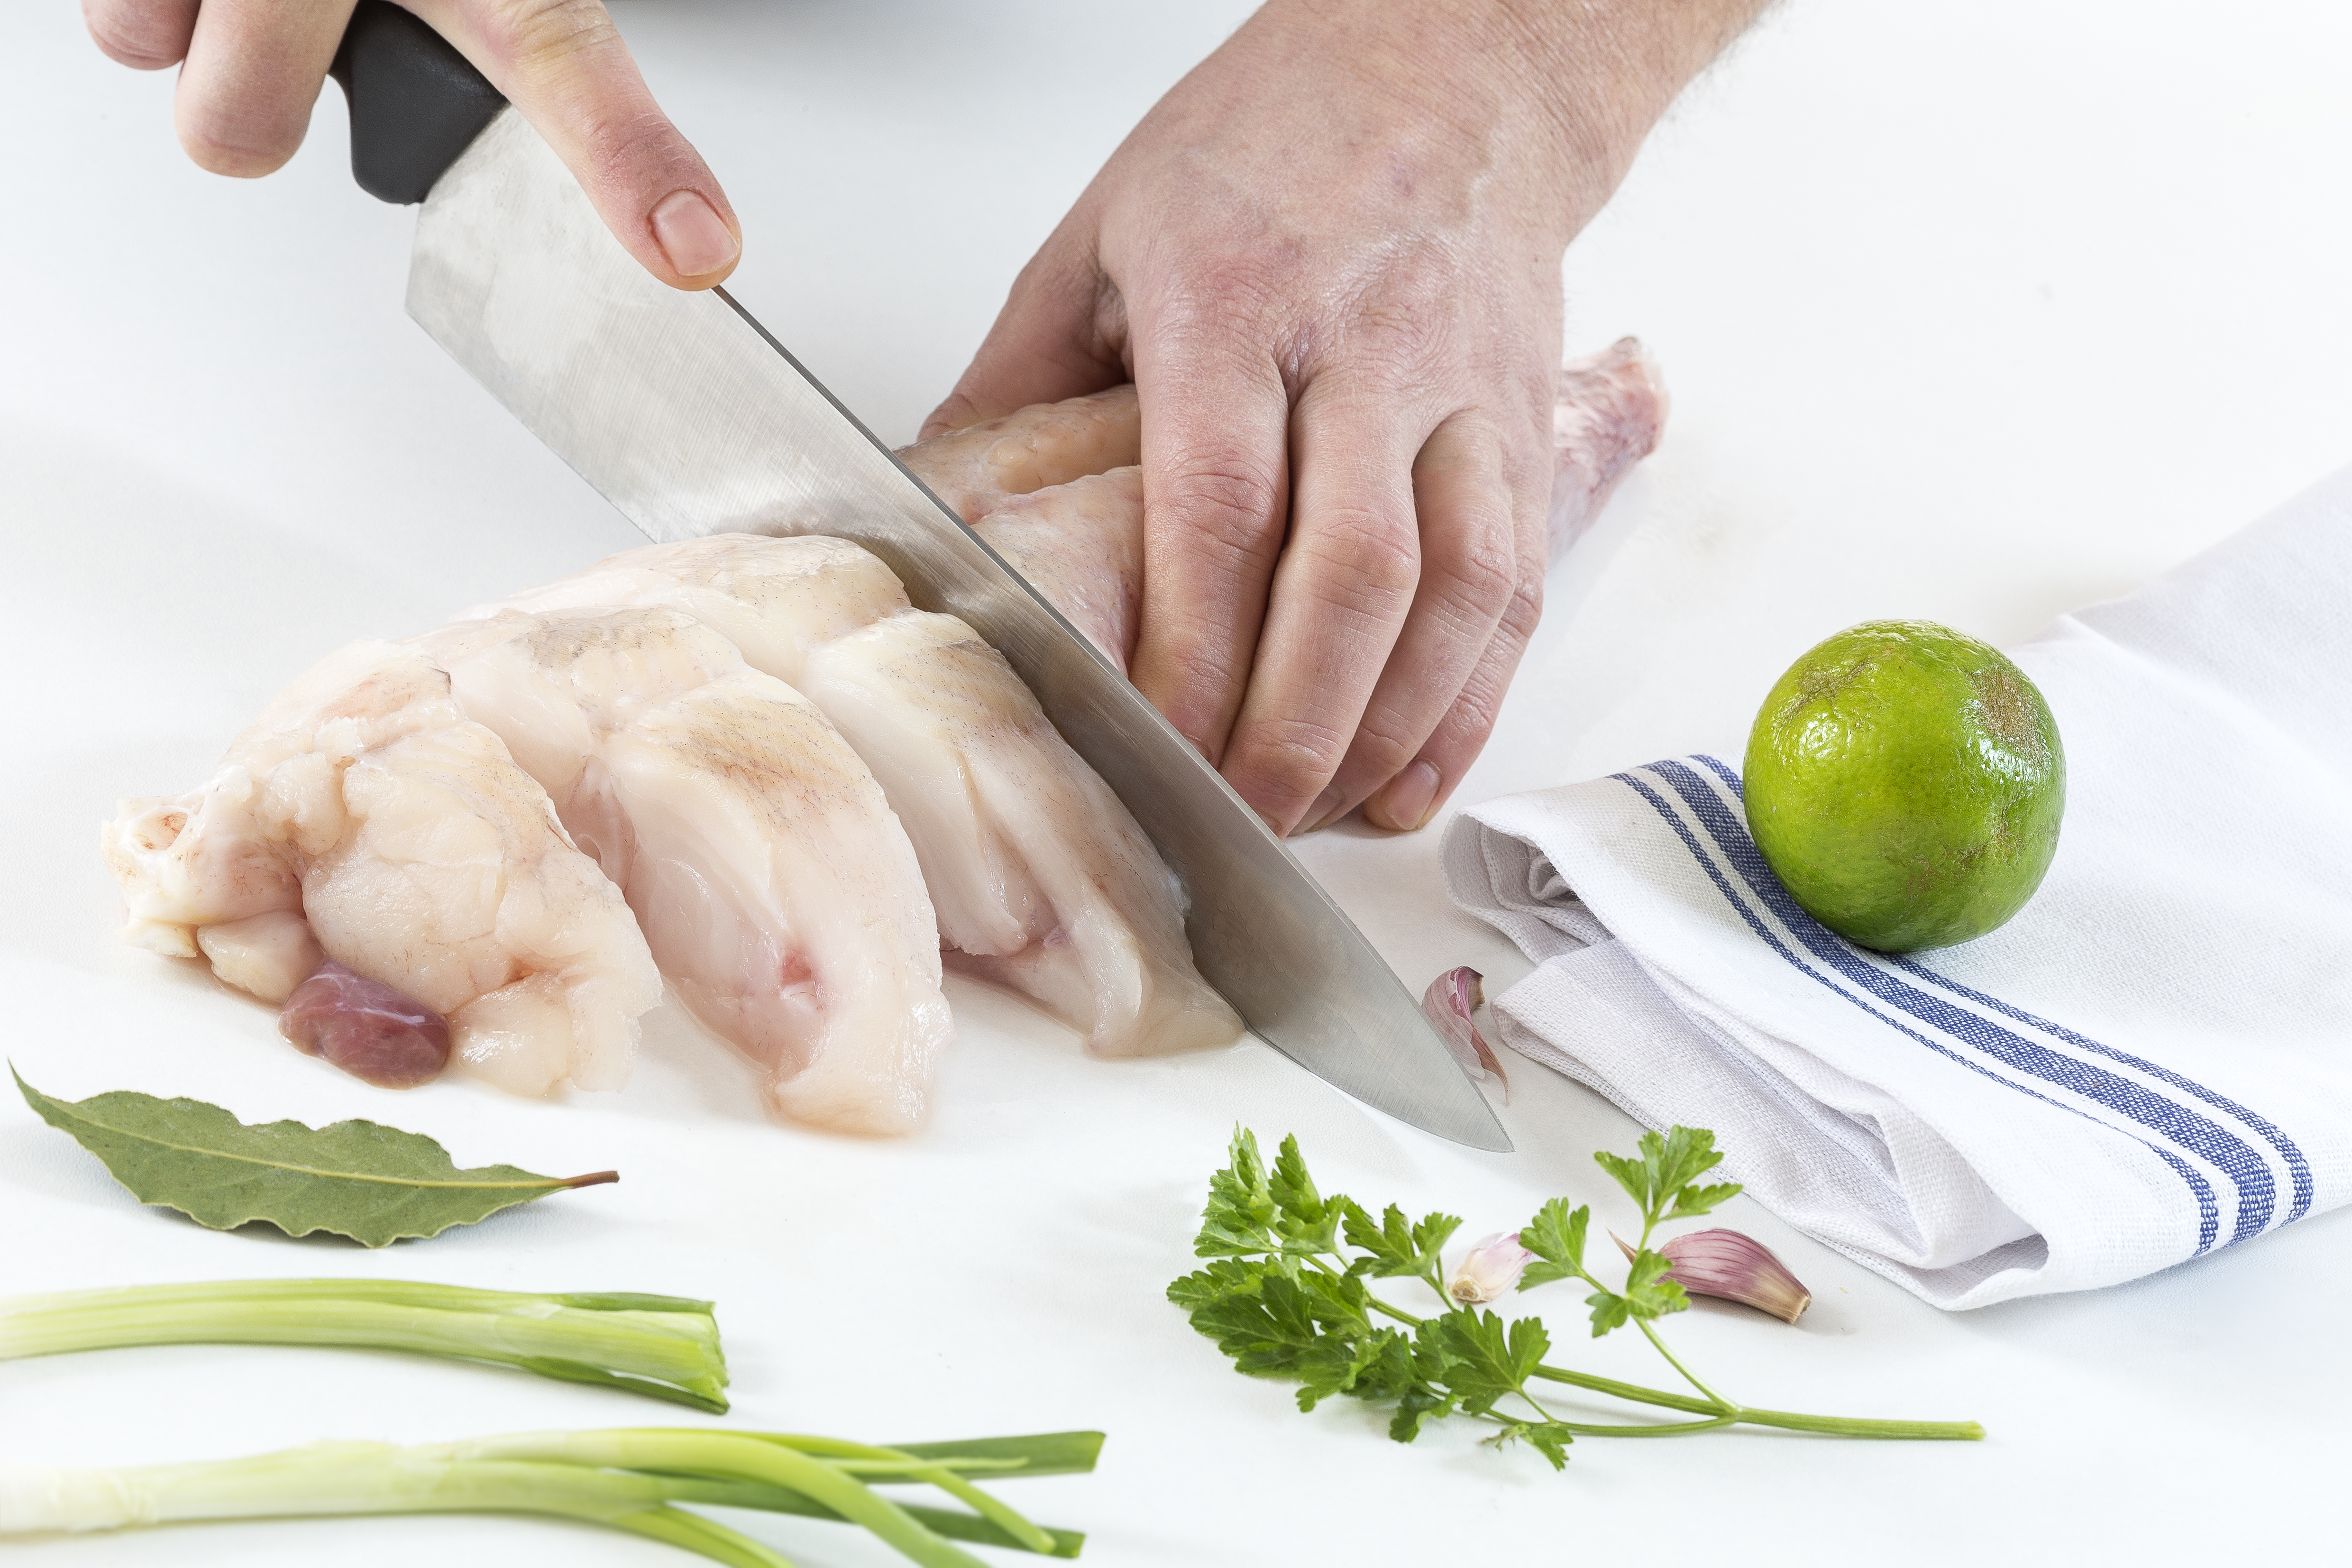 Person slicing the monkfish into steaks